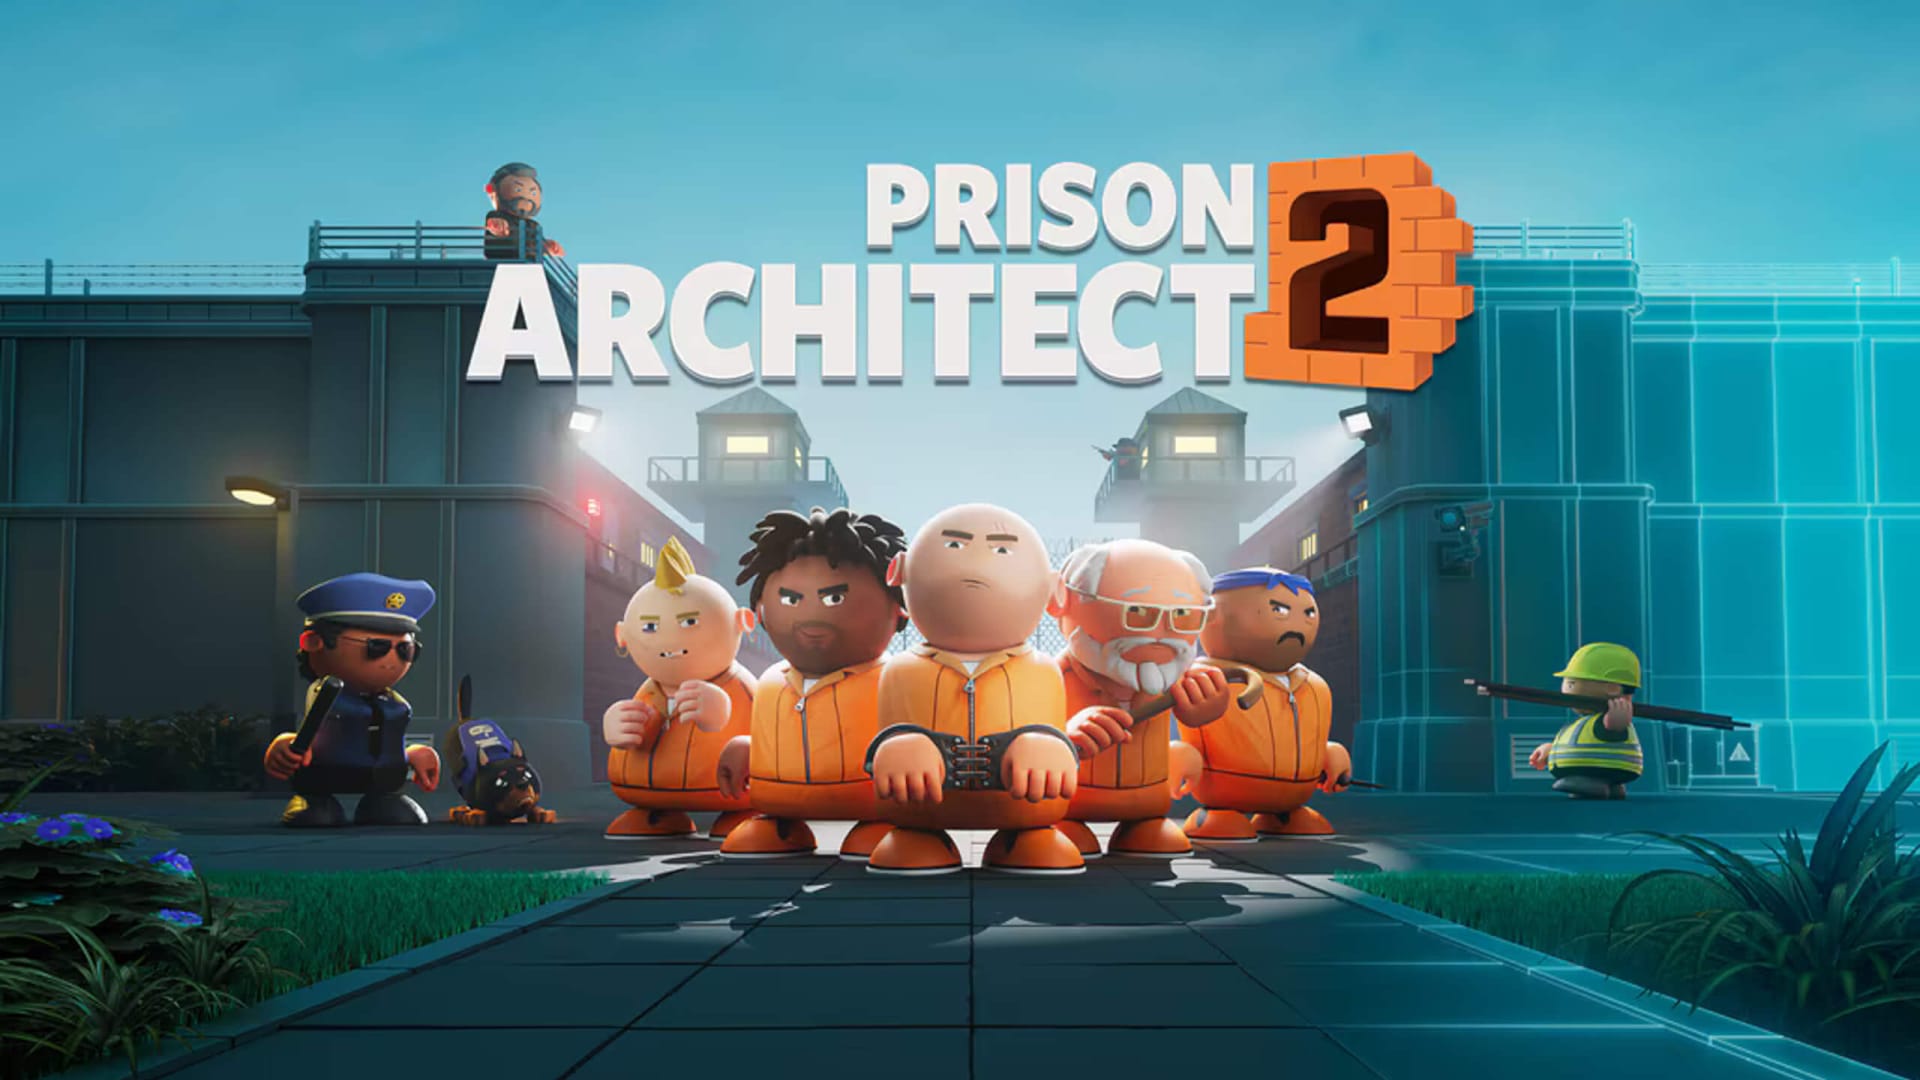 Key art for Prison Architect 2, which depicts a number of prisoners standing in front of a prison